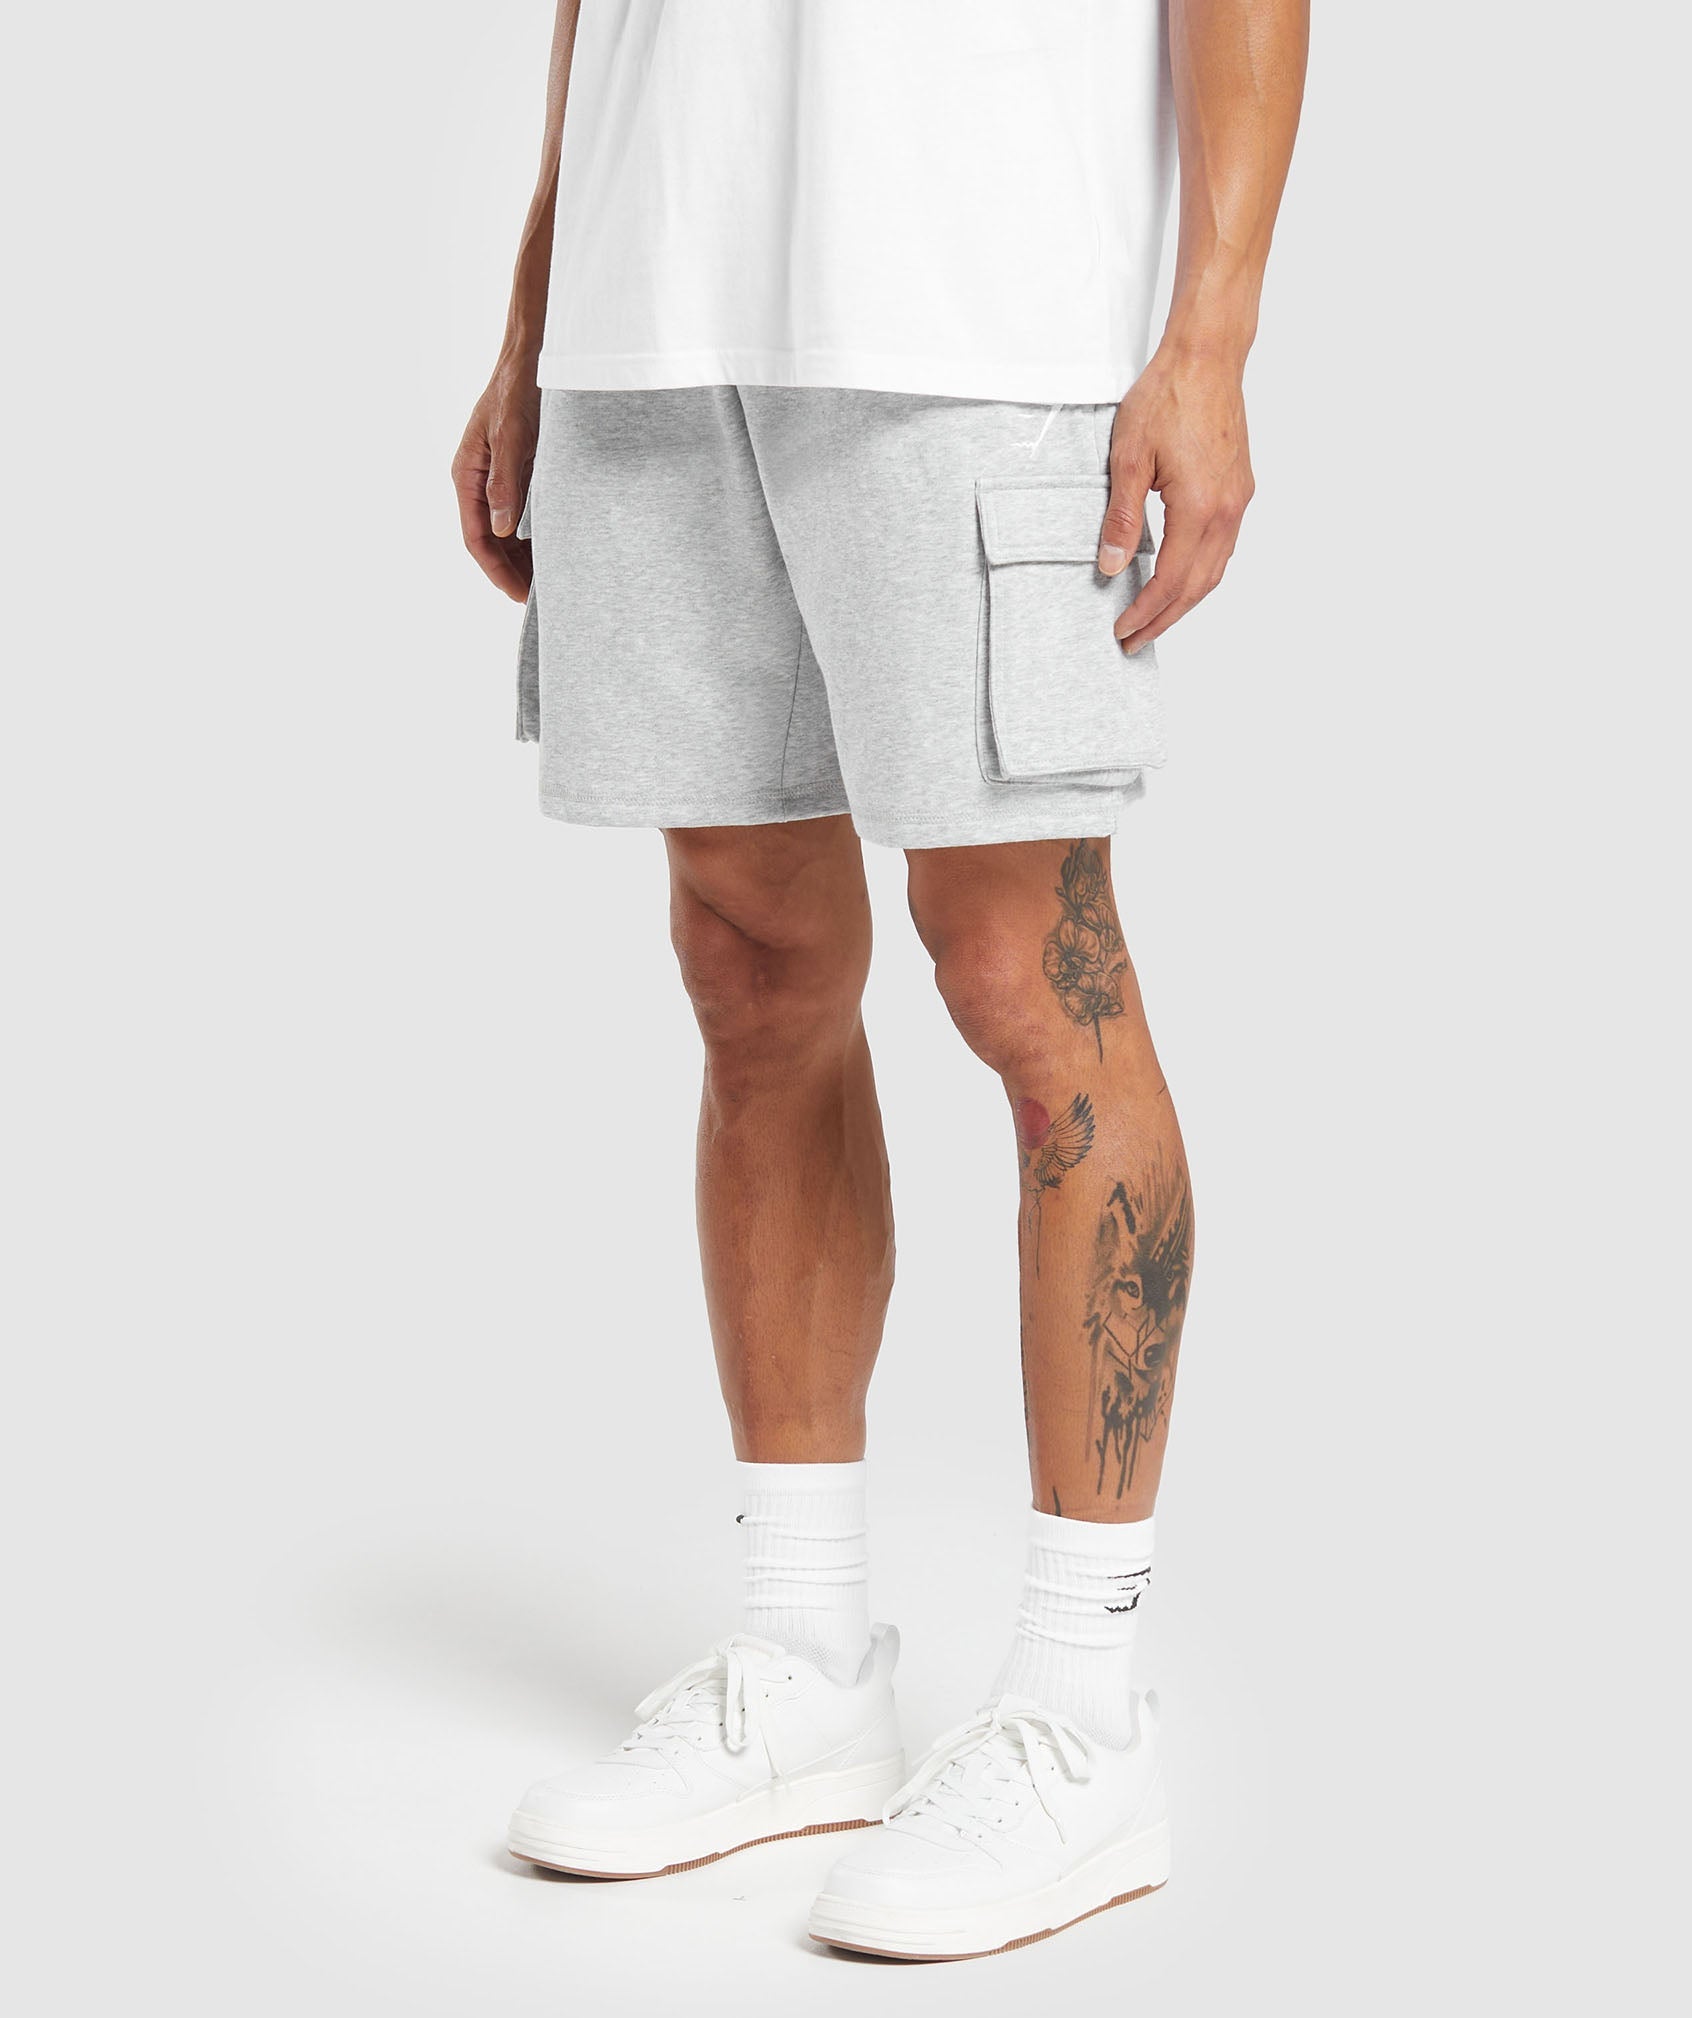 Crest Cargo Shorts in Light Grey Core Marl - view 5